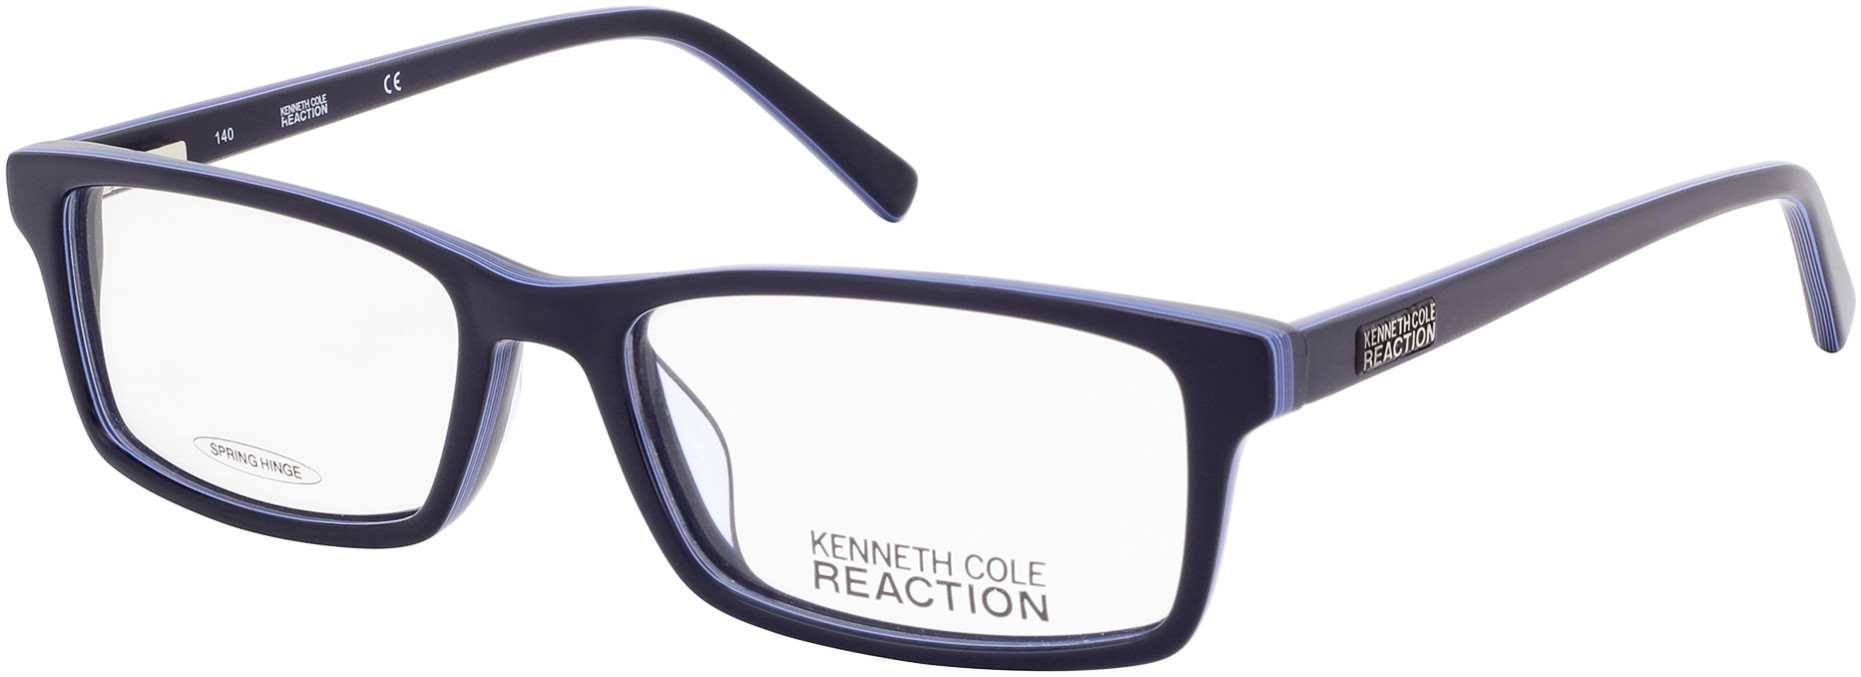 KENNETH COLE NY 0749 092